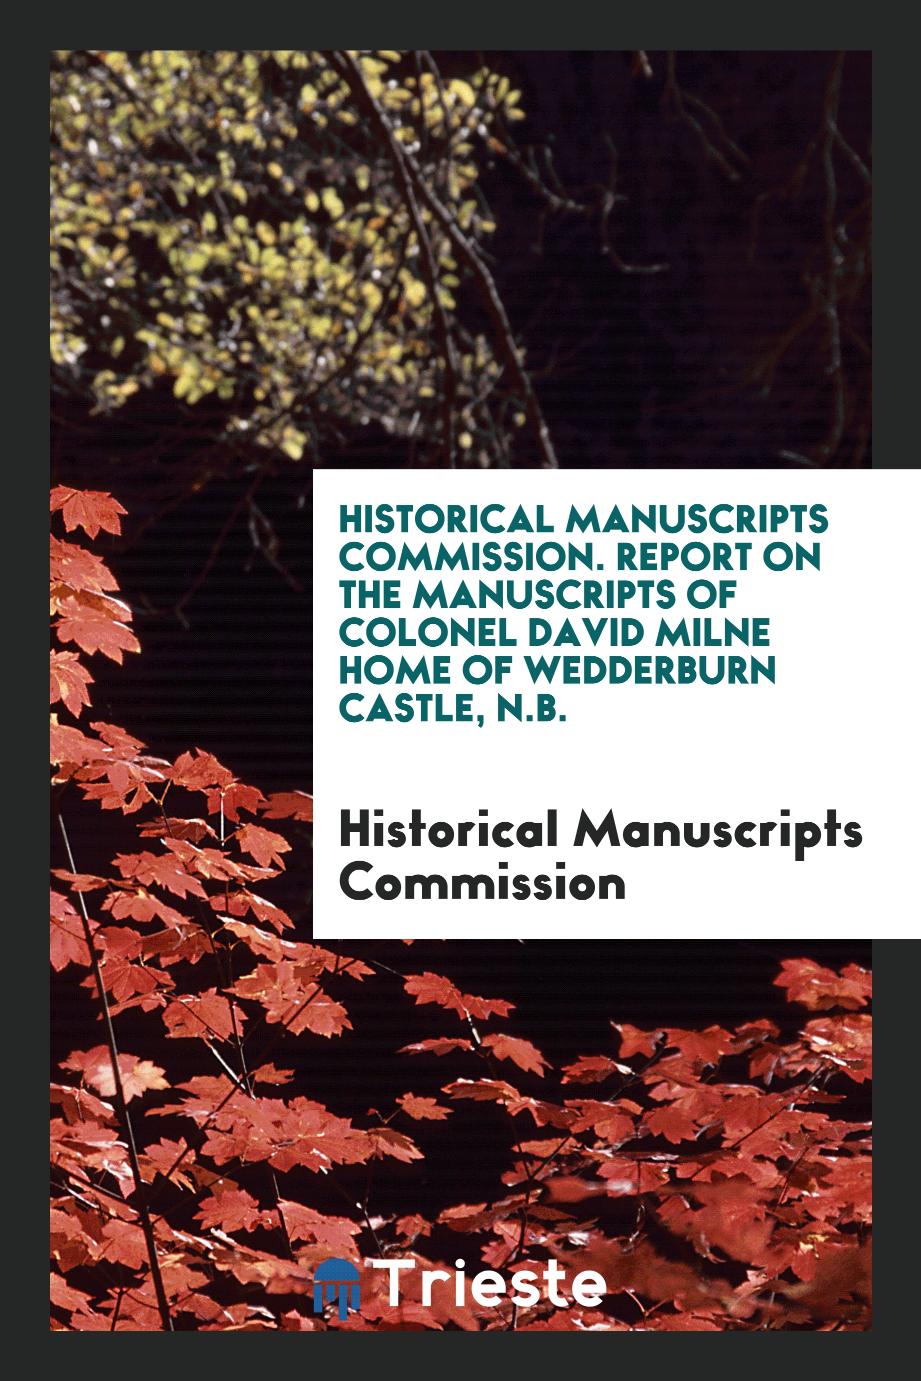 Historical Manuscripts Commission. Report on the Manuscripts of Colonel David Milne Home of Wedderburn Castle, N.B.